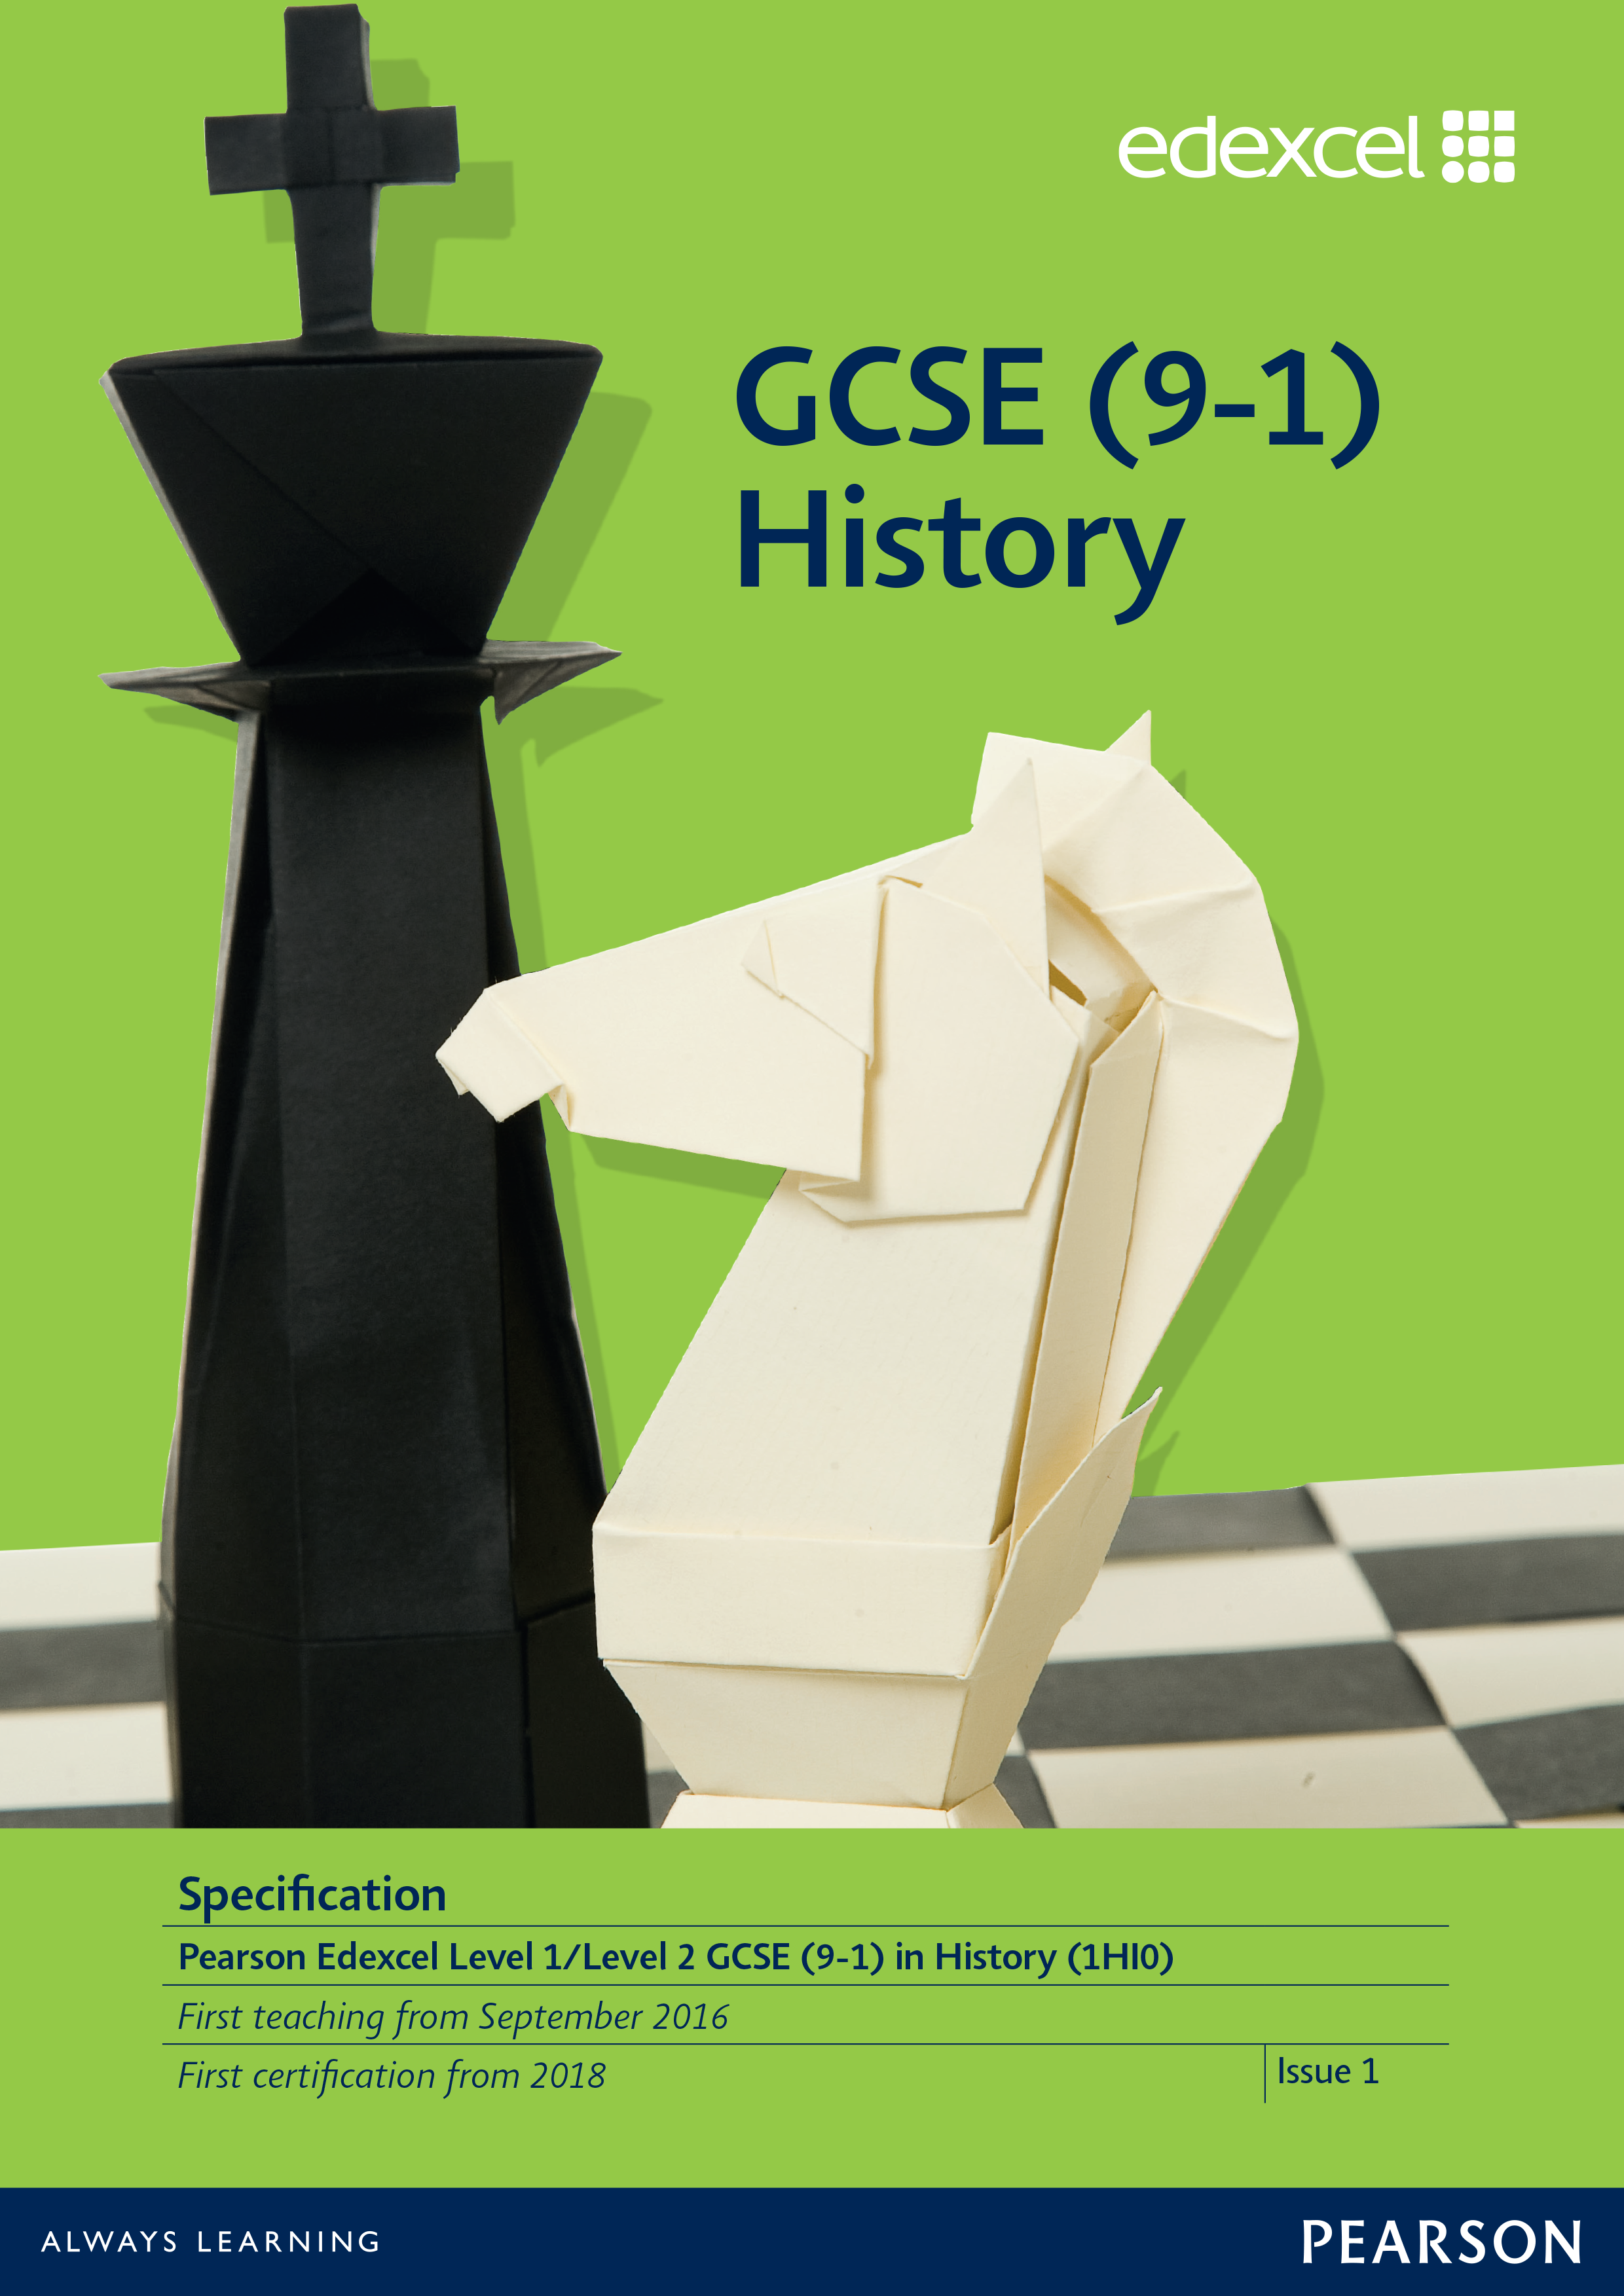 Link to Edexcel GCSE History (2016) specification page